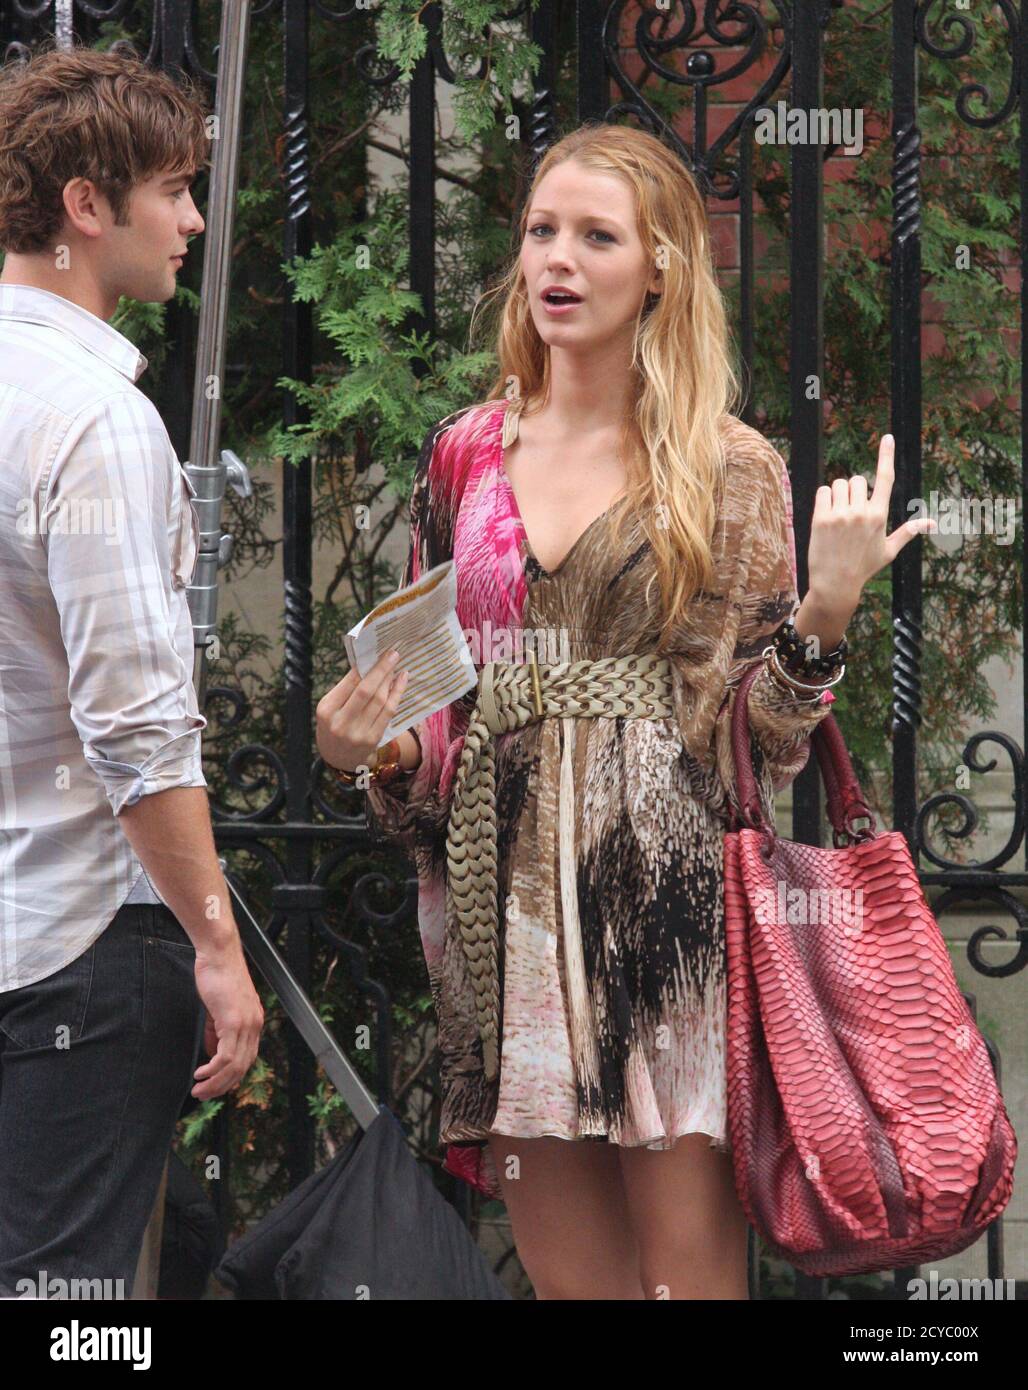 Chace Crawford and Blake Lively filming The CW's 'Gossip Girl' in New York City on July 14, 2010.  Photo Credit: Henry McGee/MediaPunch Stock Photo